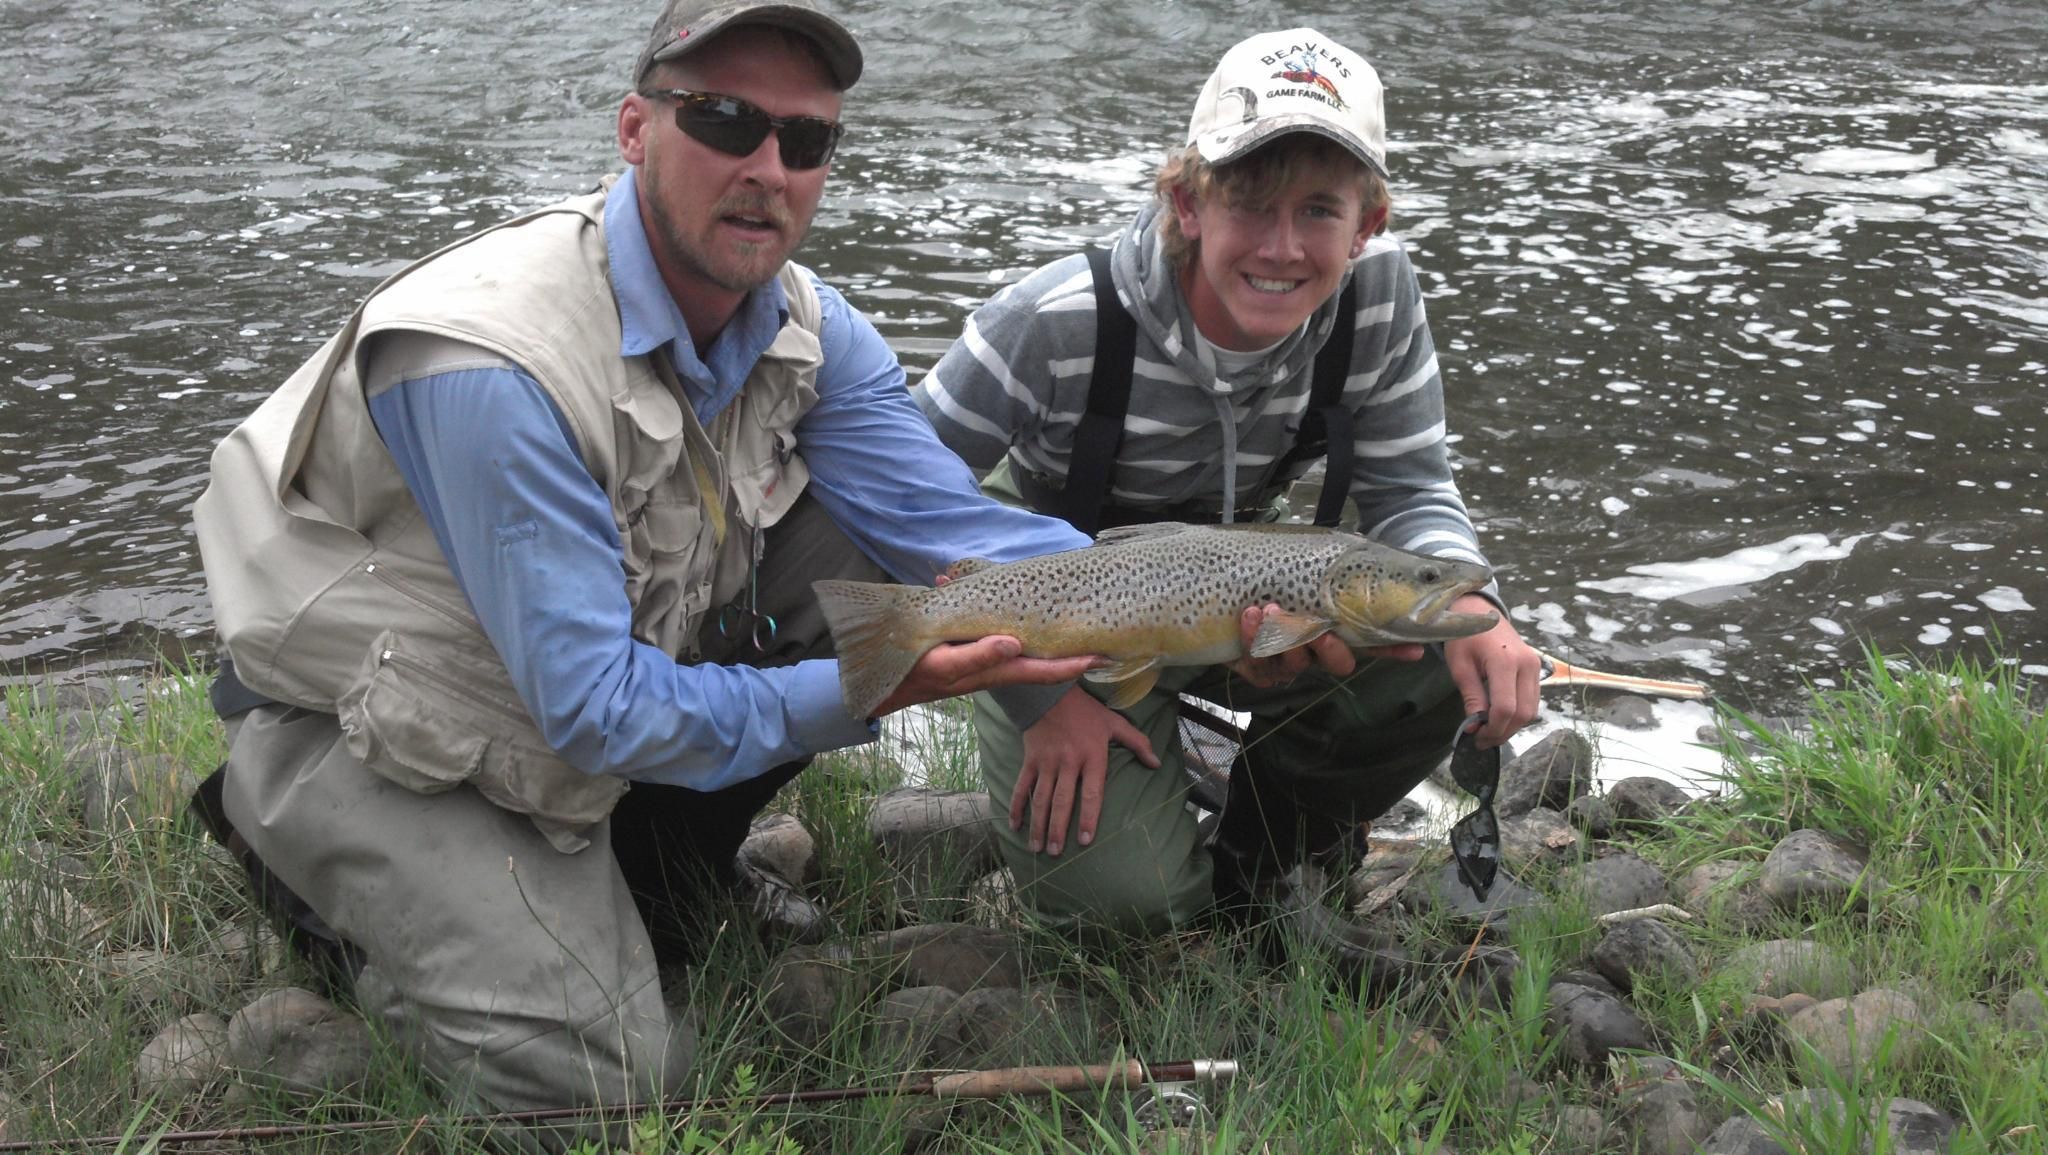 Fly Fishing Guides